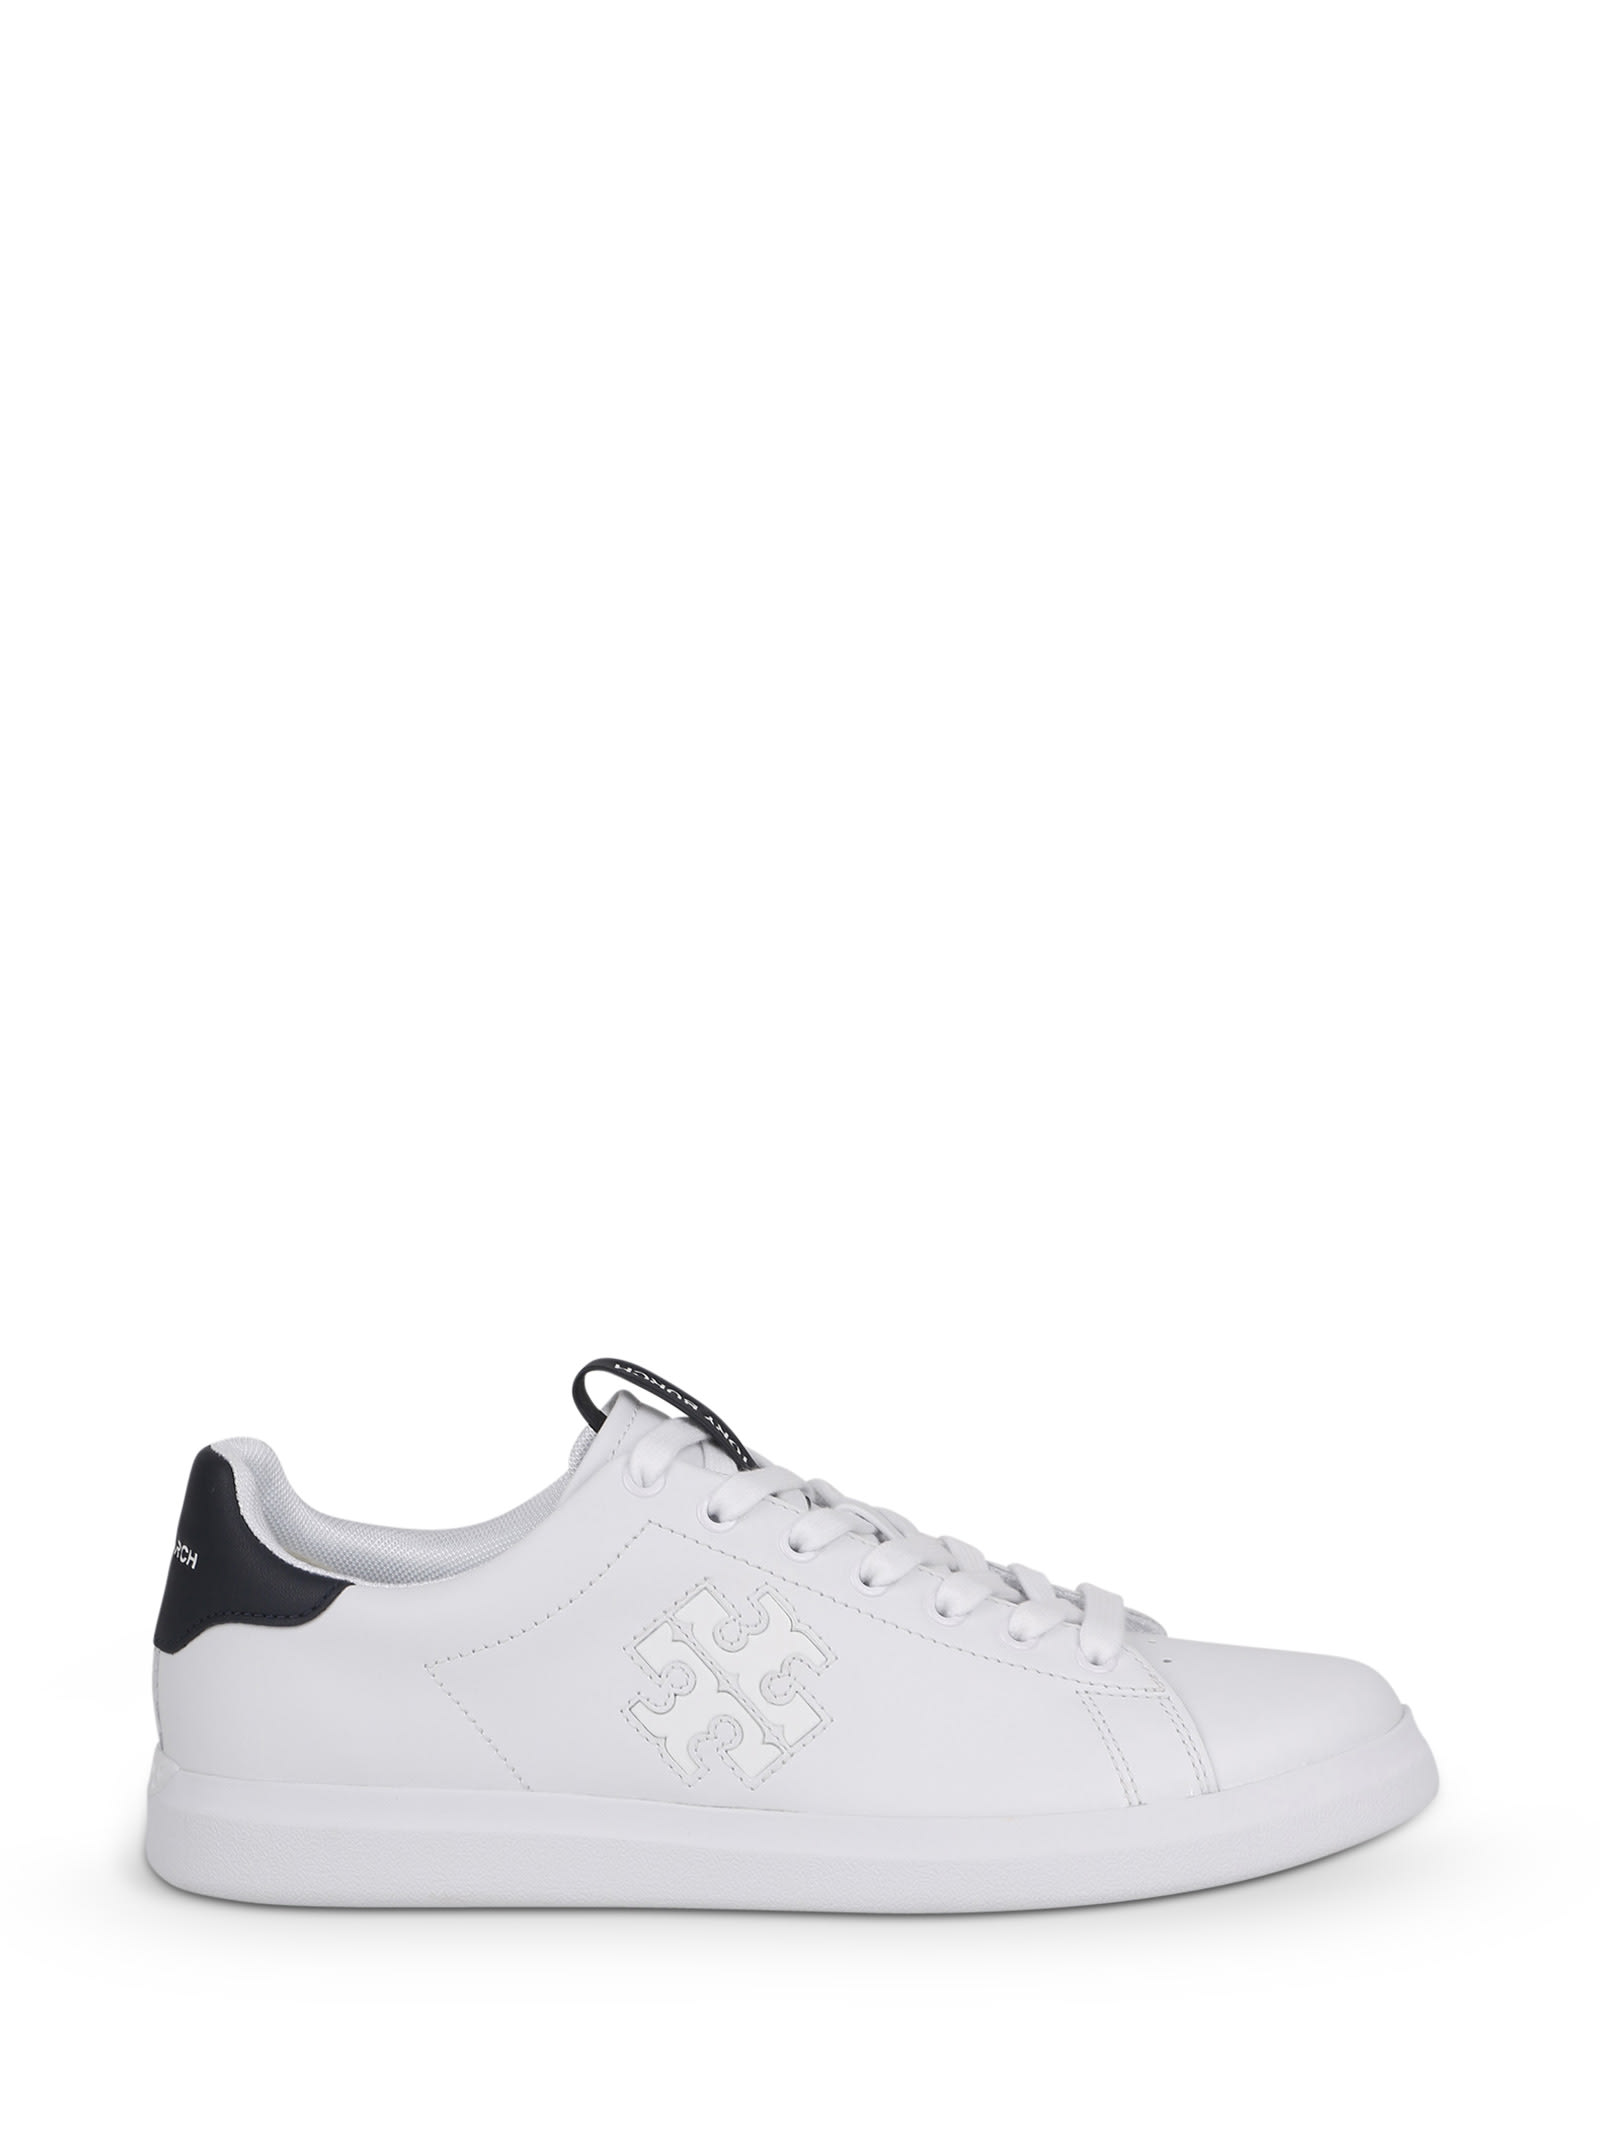 Shop Tory Burch Double T Howell Sneakers